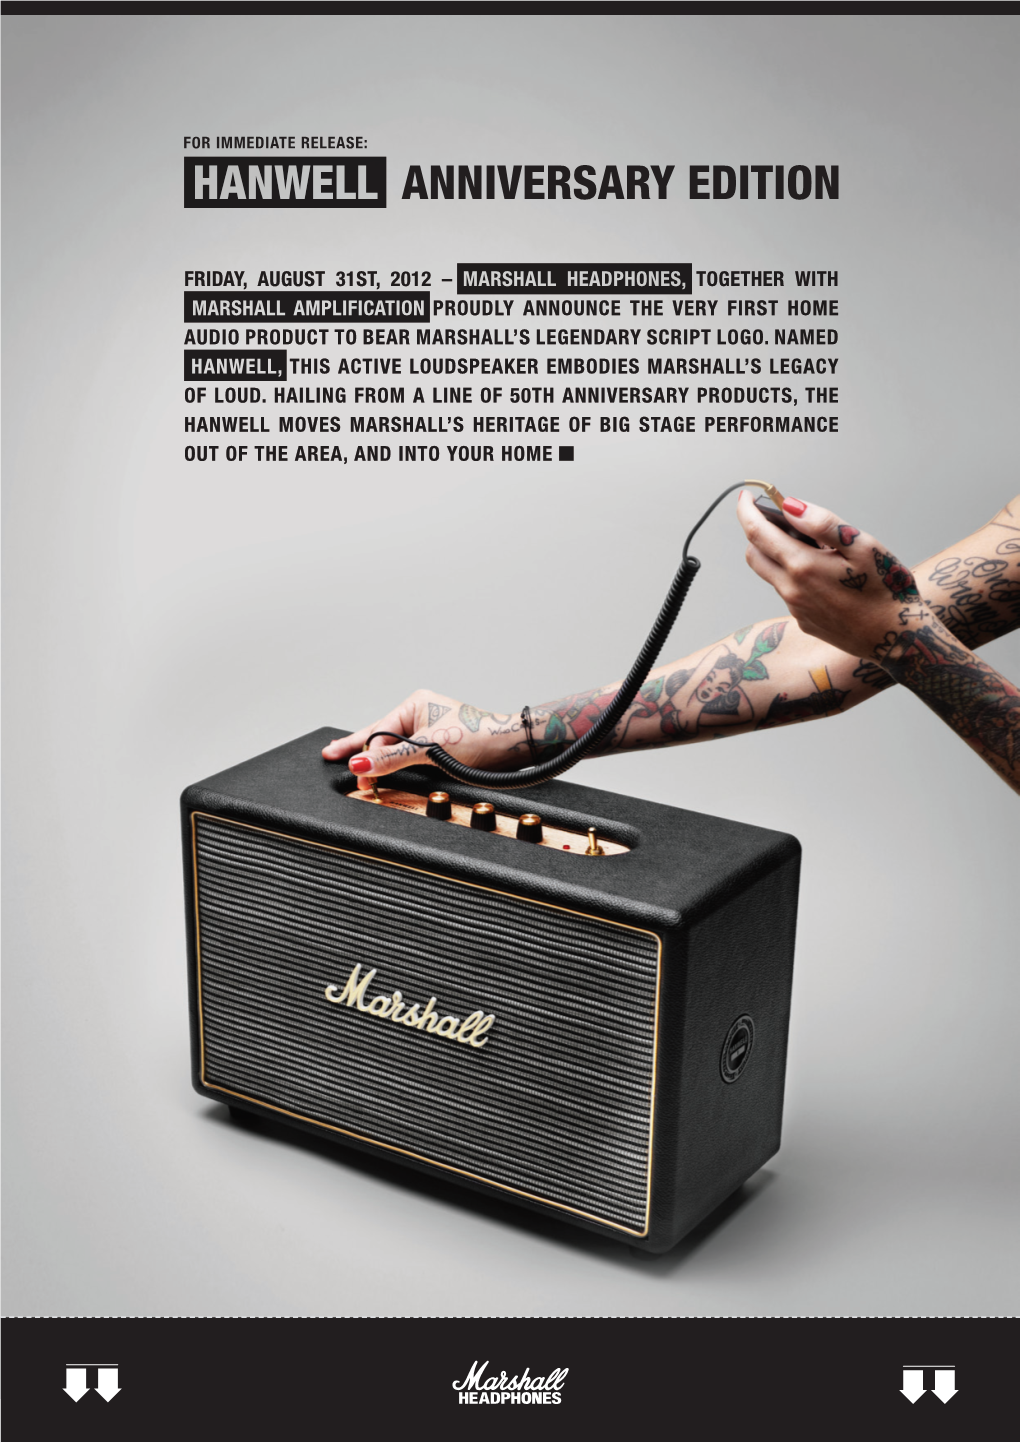 Marshall Headphones, Together with Marshall Amplification Proudly Announce the Very First Home Audio Product to Bear Marshall’S Legendary Script Logo